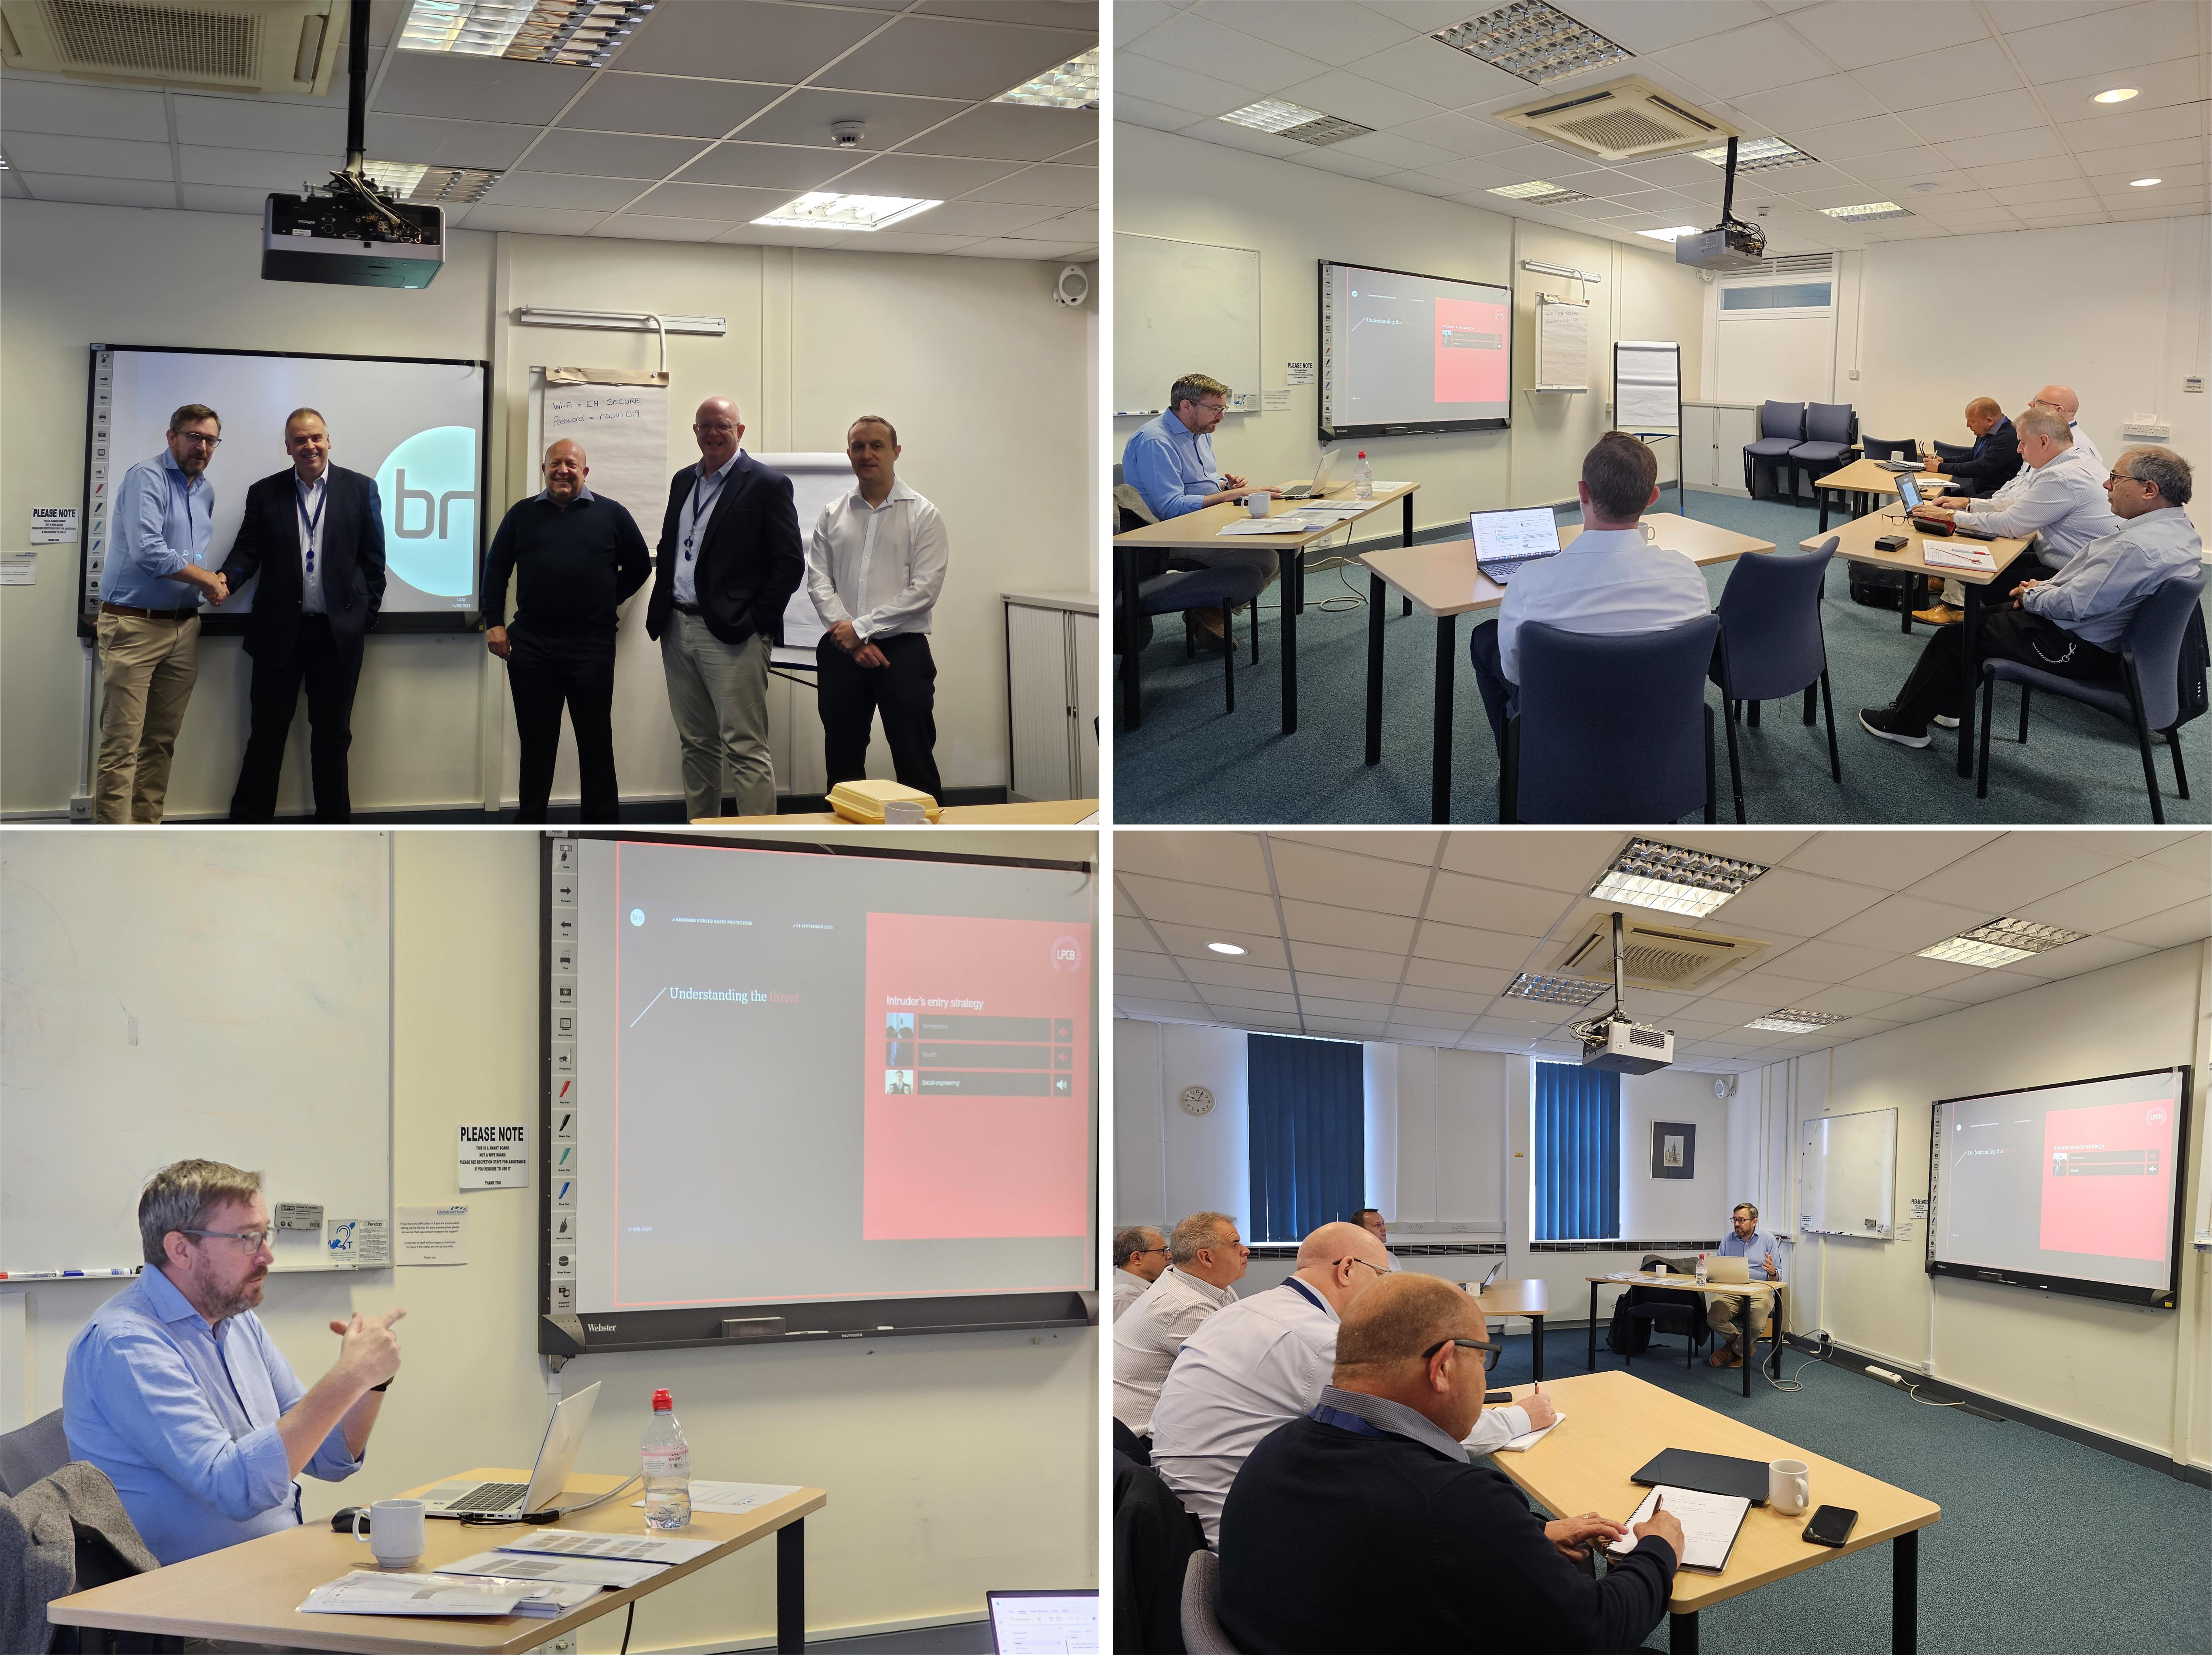 LPS-1175 issue 8 training is an important part of SGW Security Consulting teams 2023 continued professional development (CPD) training.